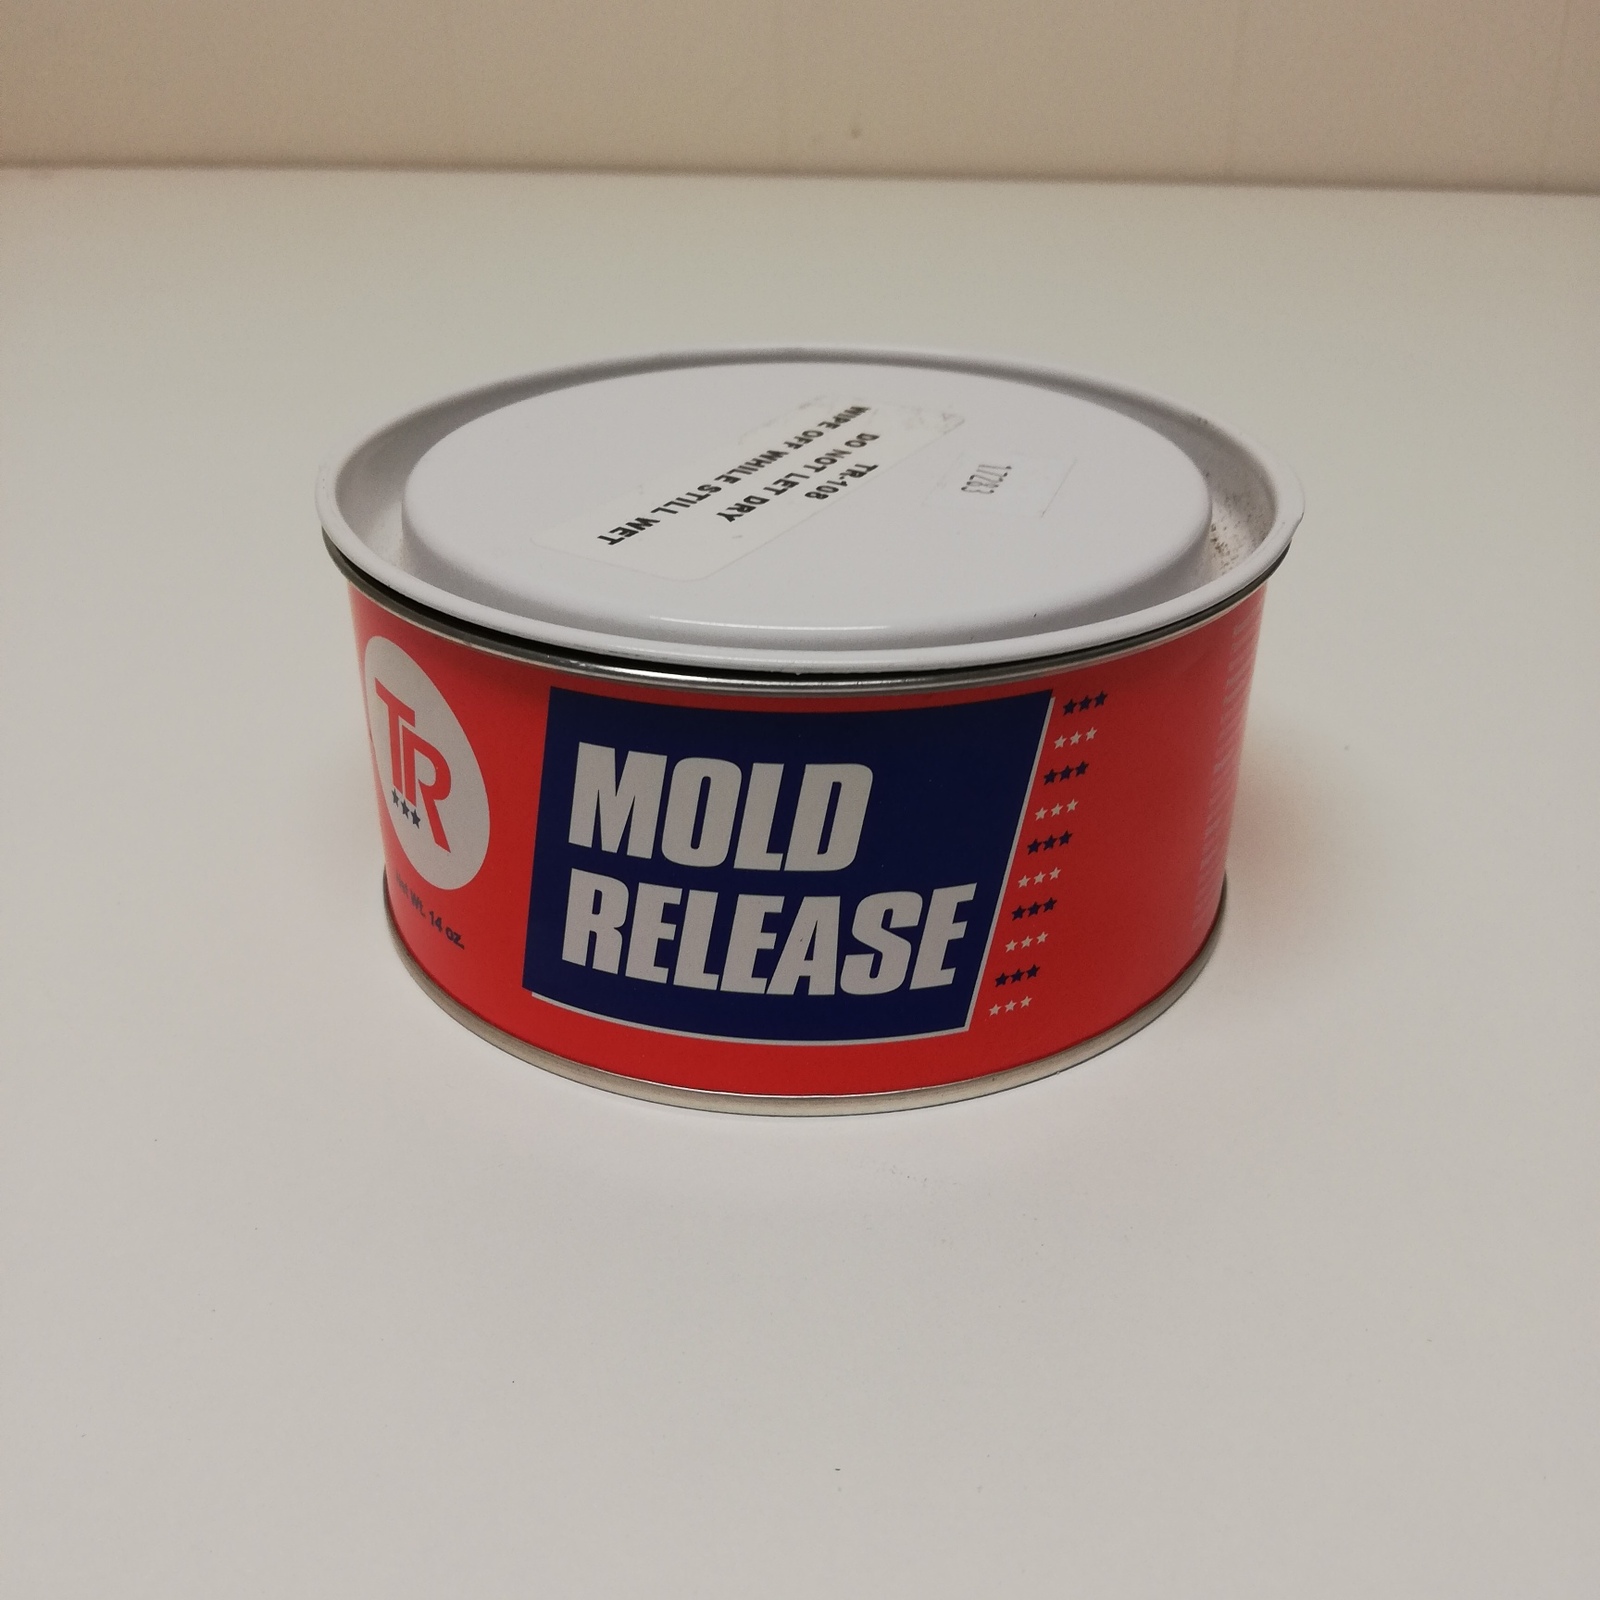 Removing silicone mold release and polysilane oils